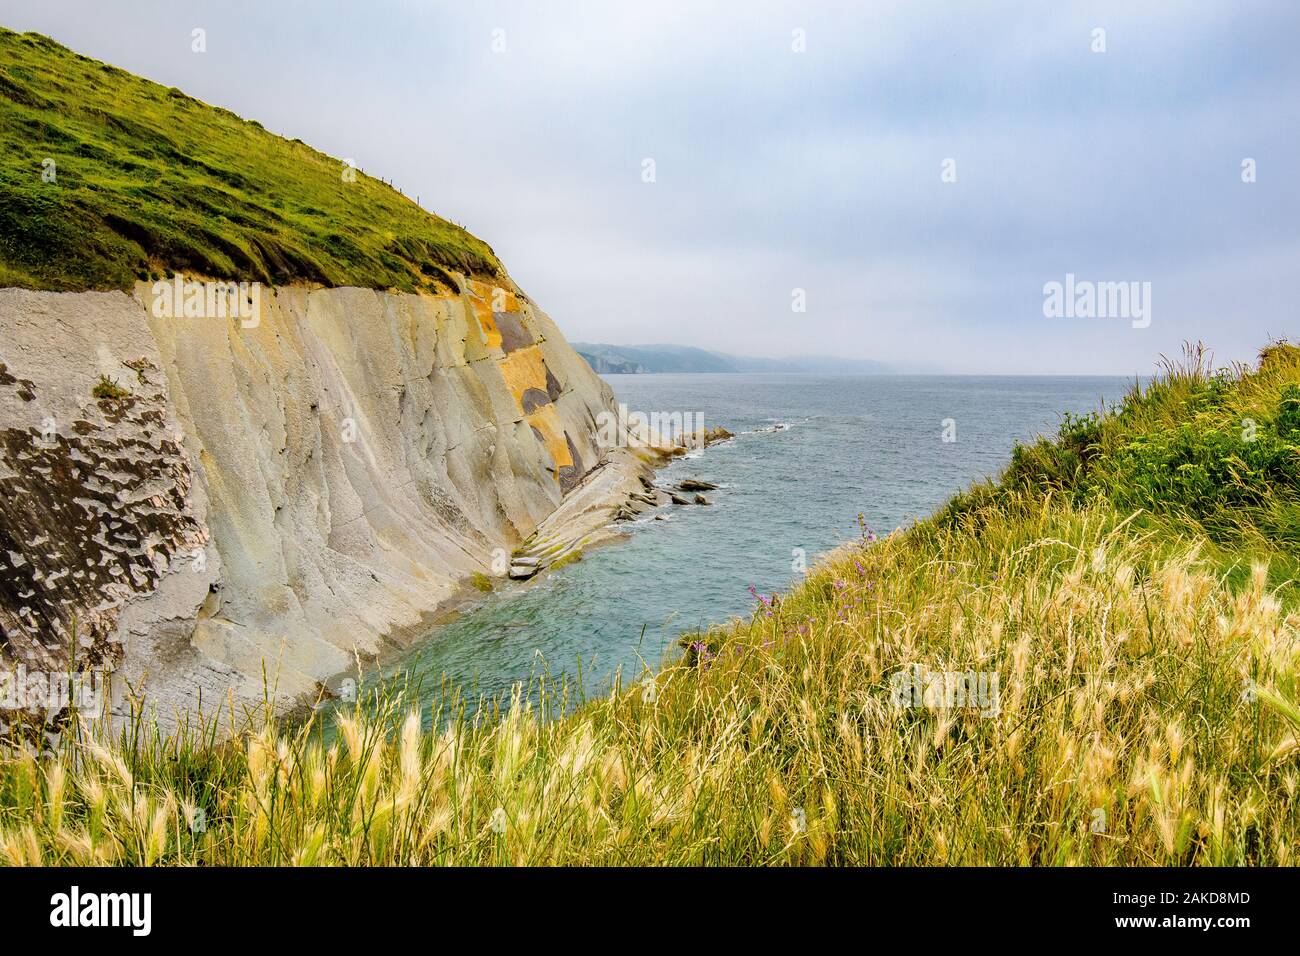 A view of  small church on a coastline of Zumaia Stock Photo